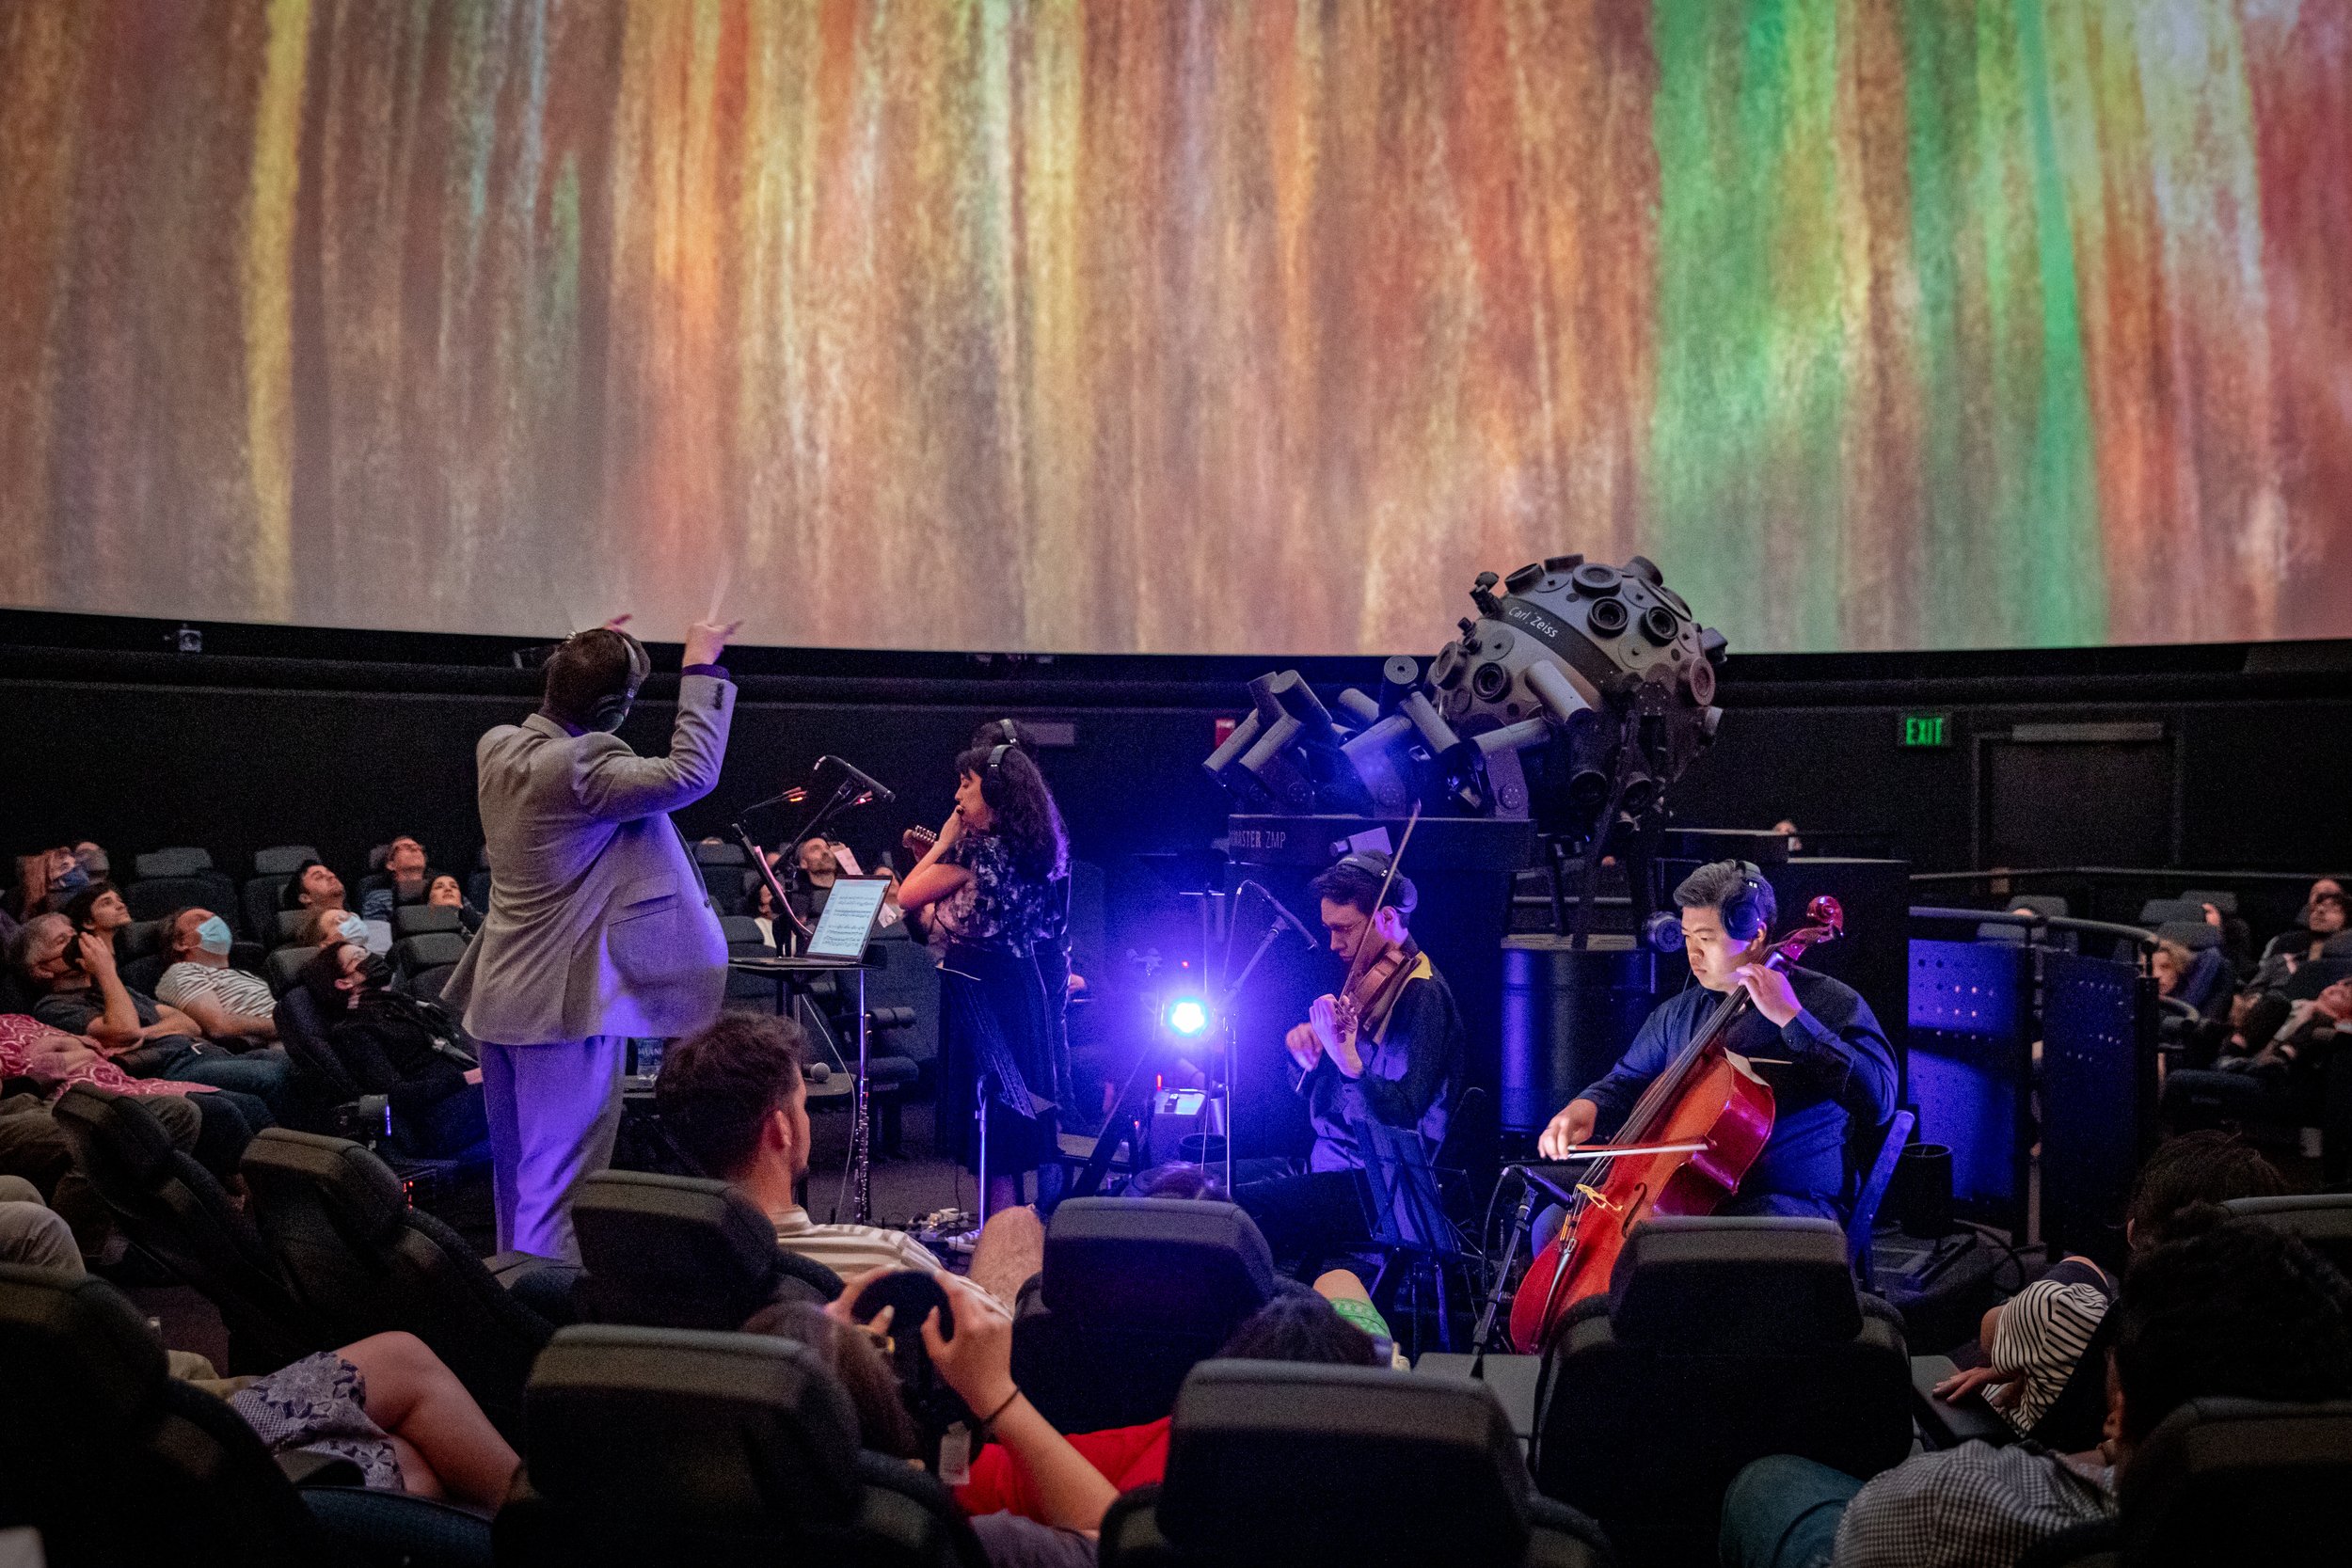 David conducting at the Black Hole Symphony Premiere, Museum of Science, Boston